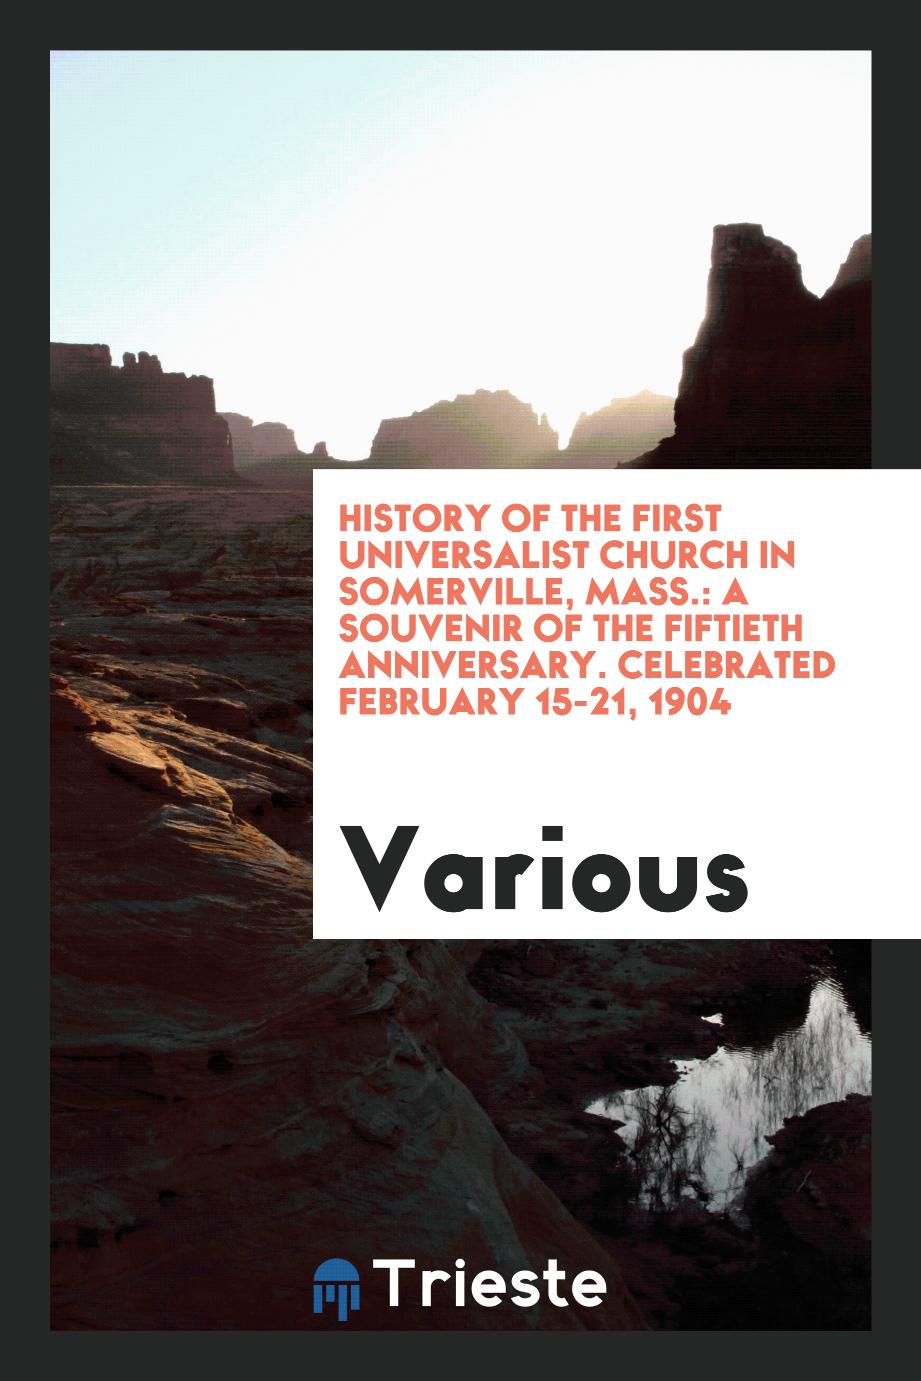 History of the First Universalist Church in Somerville, Mass.: A Souvenir of the Fiftieth Anniversary. Celebrated February 15-21, 1904